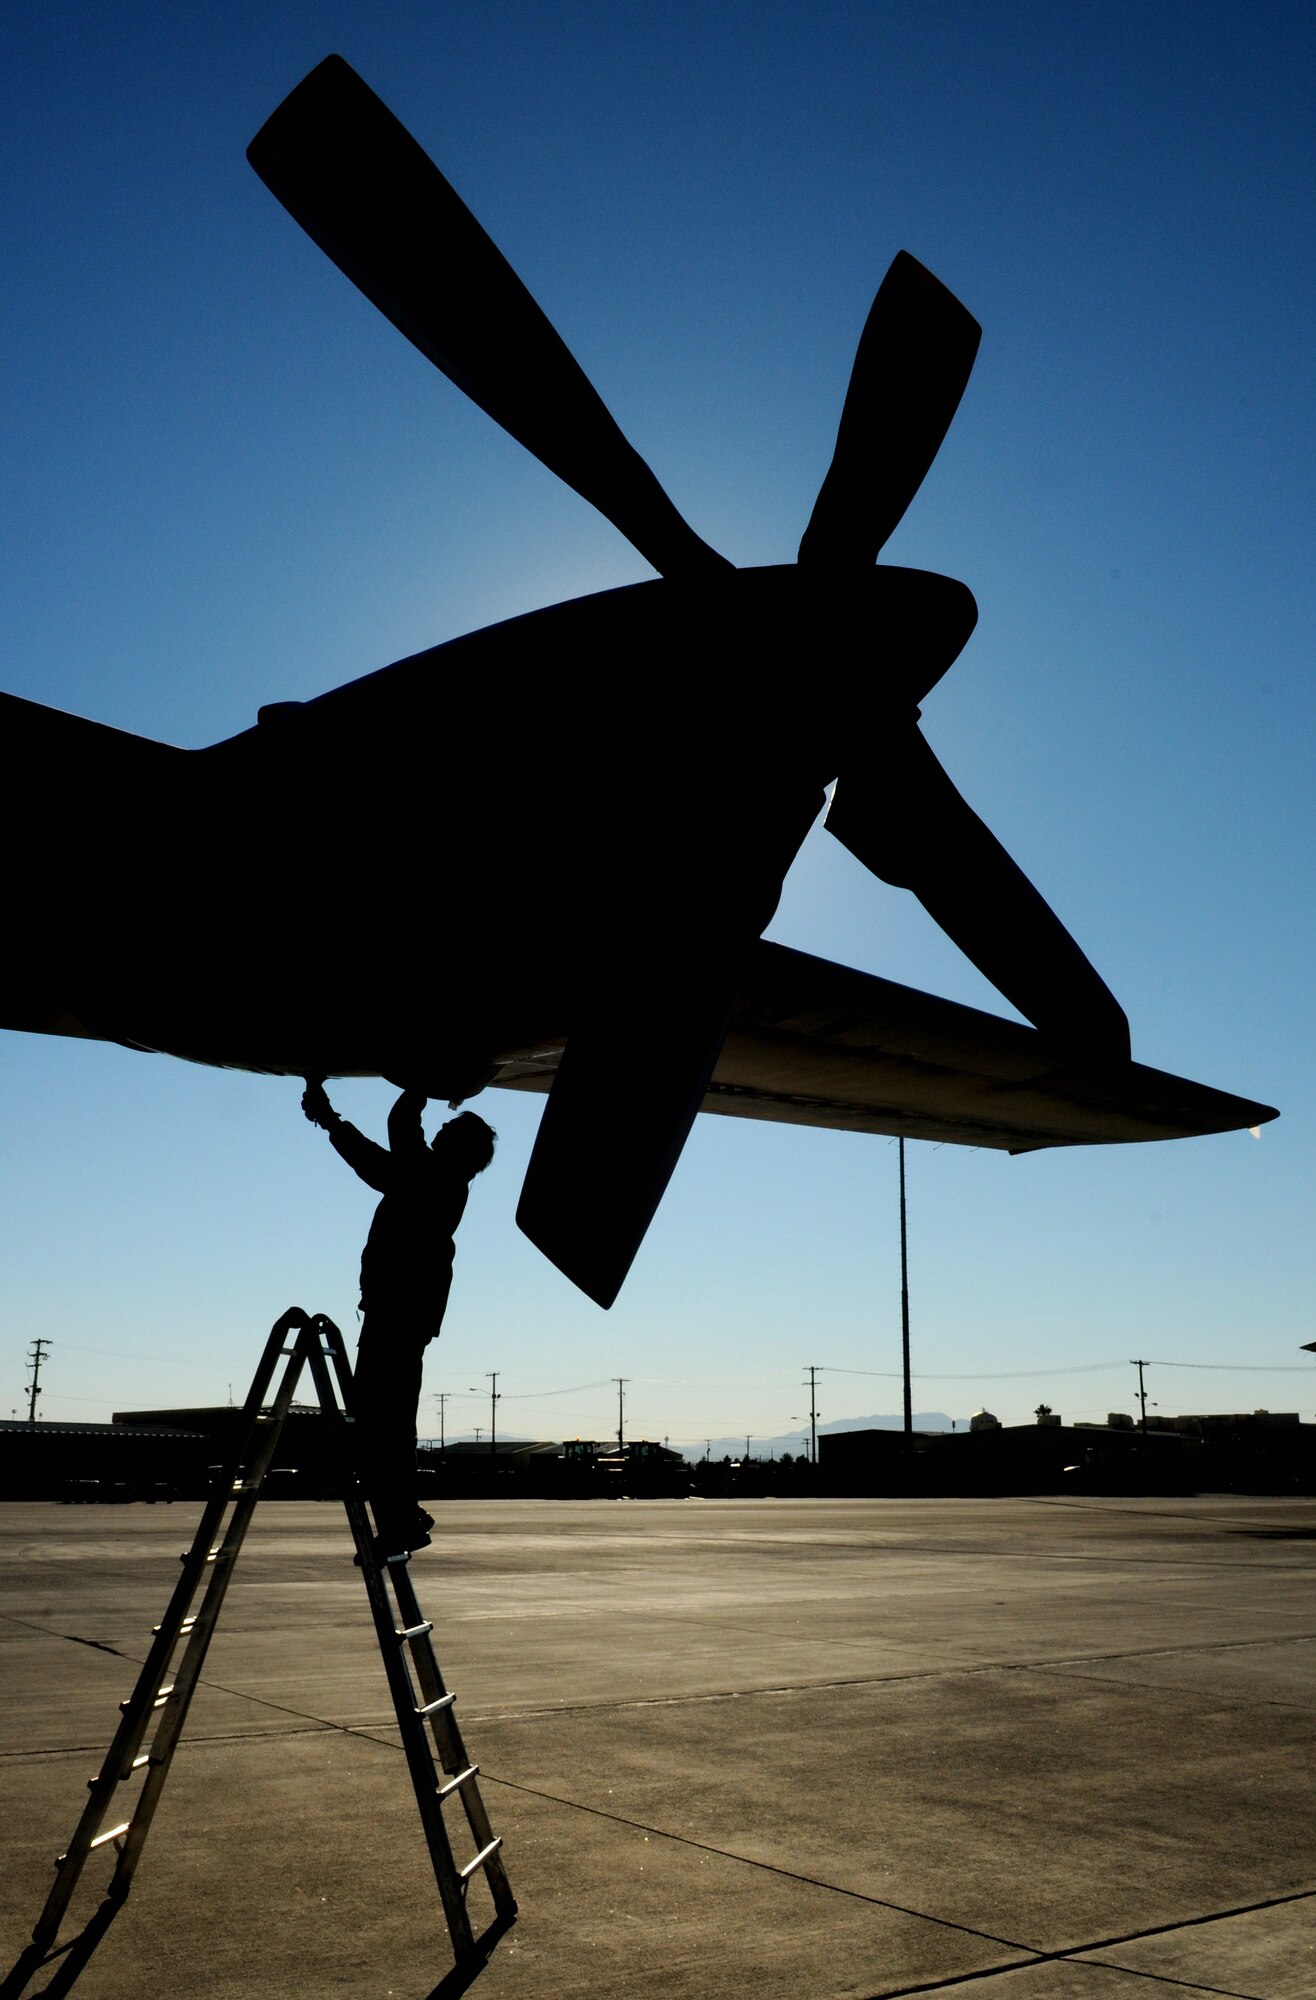 NELLIS AIR FORCE BASE, Nev. -- Adjutant Ludo Geens, aircraft maintainer, performs a post-flight inspection on a C-130 Hercules from the Belgium air force's 20 Squadron Feb. 2 after completing a mission in Red Flag 11-2. The C-130 and Adjutatn Geens are deployed from Melsbroek Air Base, Belgium, to participate in the combined exercise that provides a realistic combat training environment to the U.S. and its allies. (U.S. Air Force photo/Staff Sgt. Benjamin Wilson)